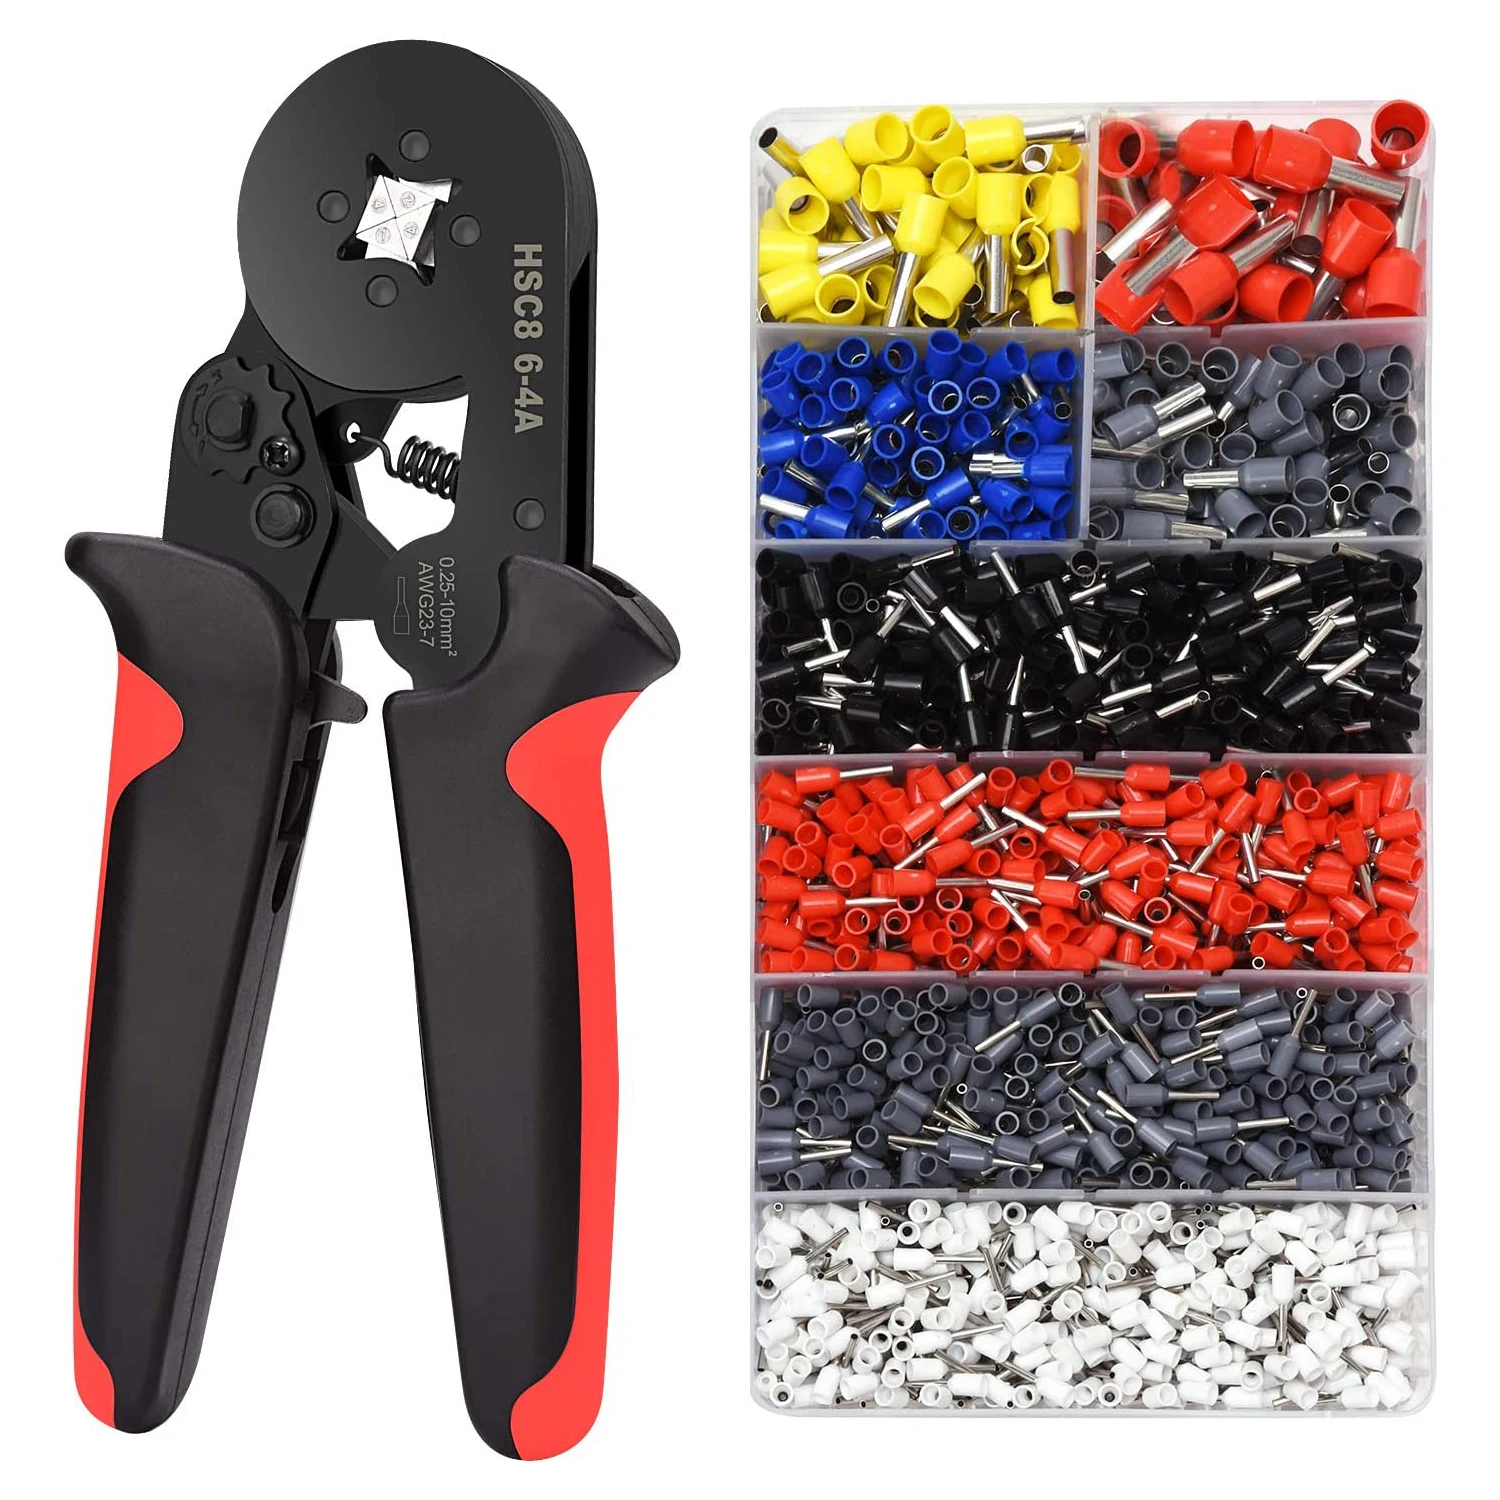 

Wire Ferrules Terminals Kit Ferrule Crimping Tool Kit Assortment Wire Crimp Pin Terminal Connector Wire Ends Terminals